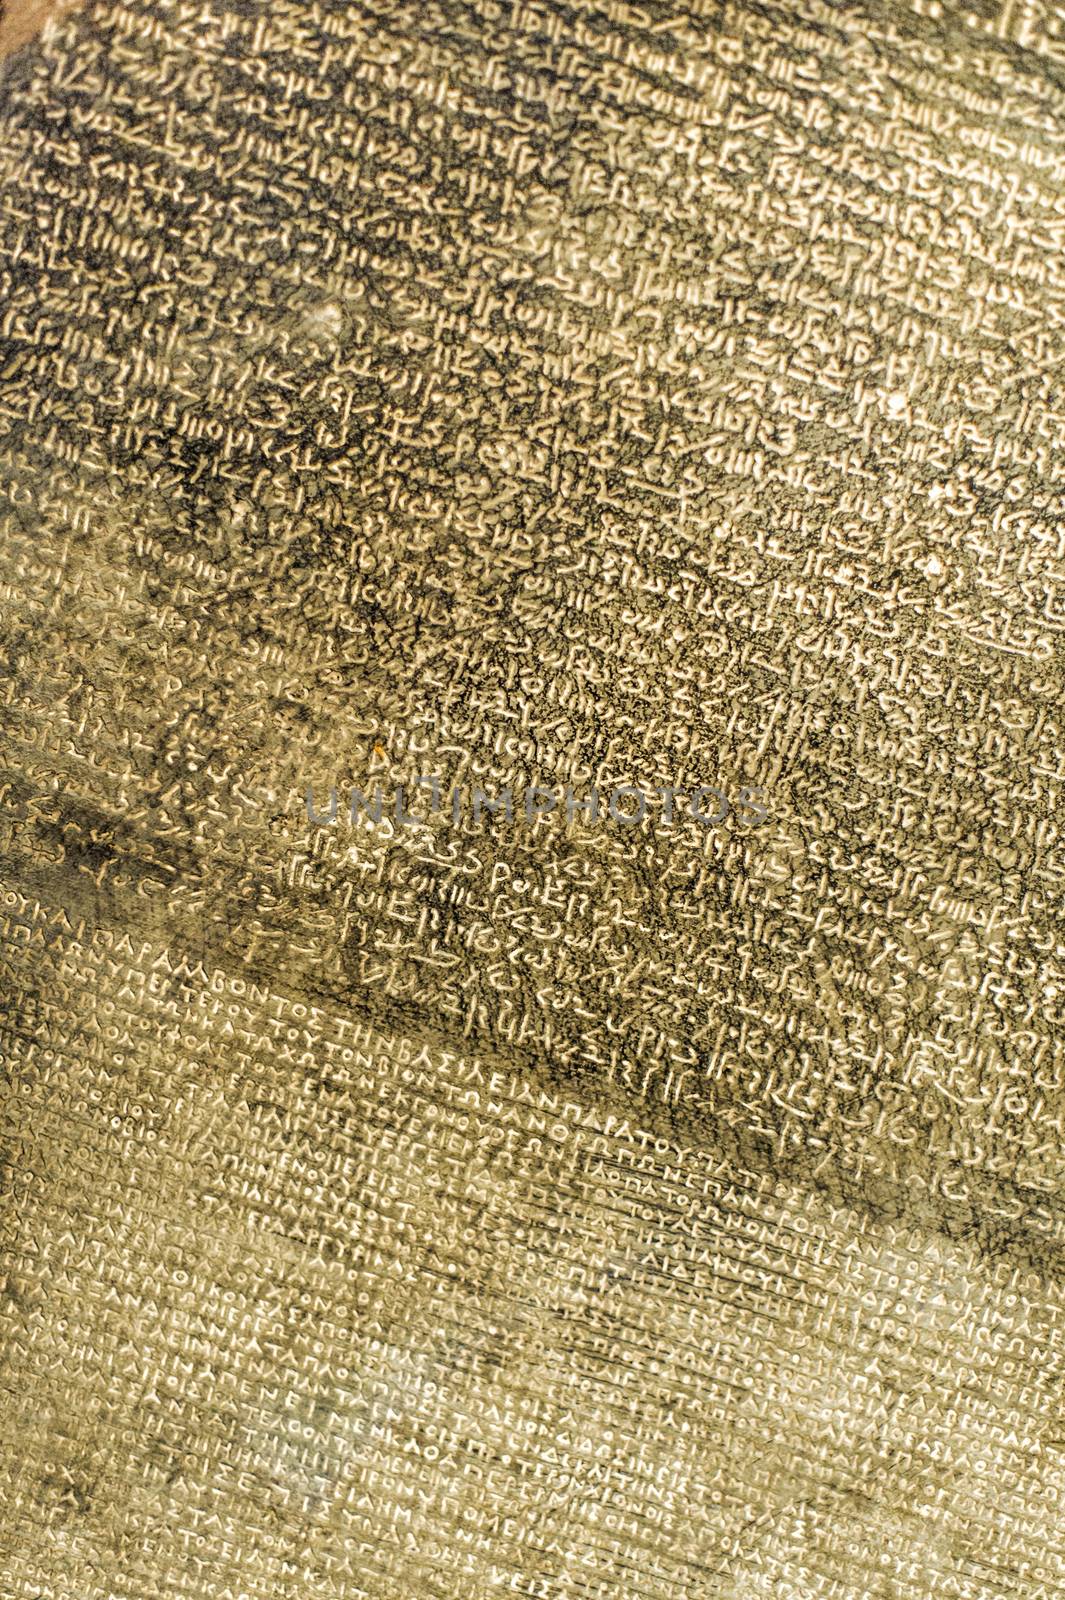 Detail view of Rosetta Stone by tepic